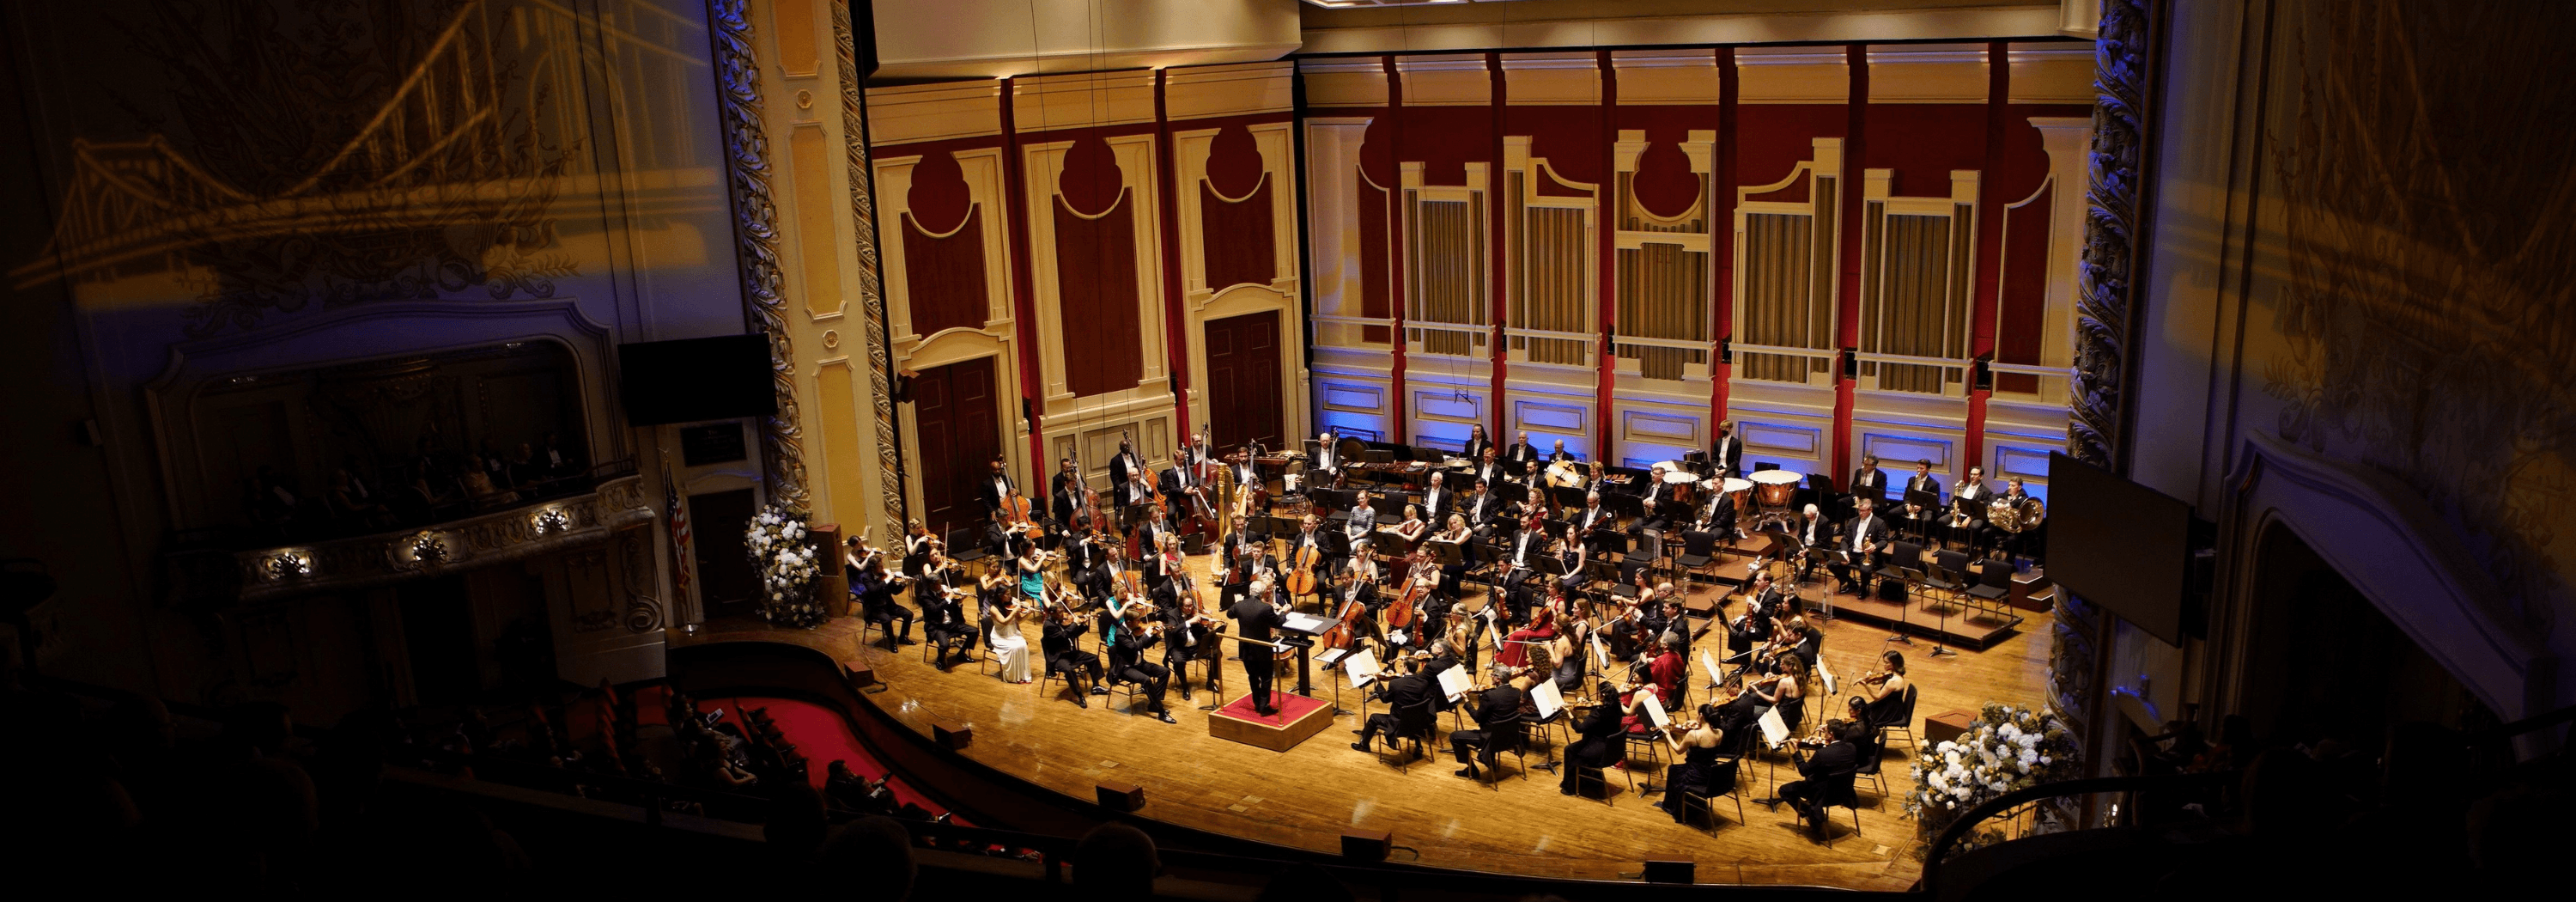 Audience in Heinz Hall